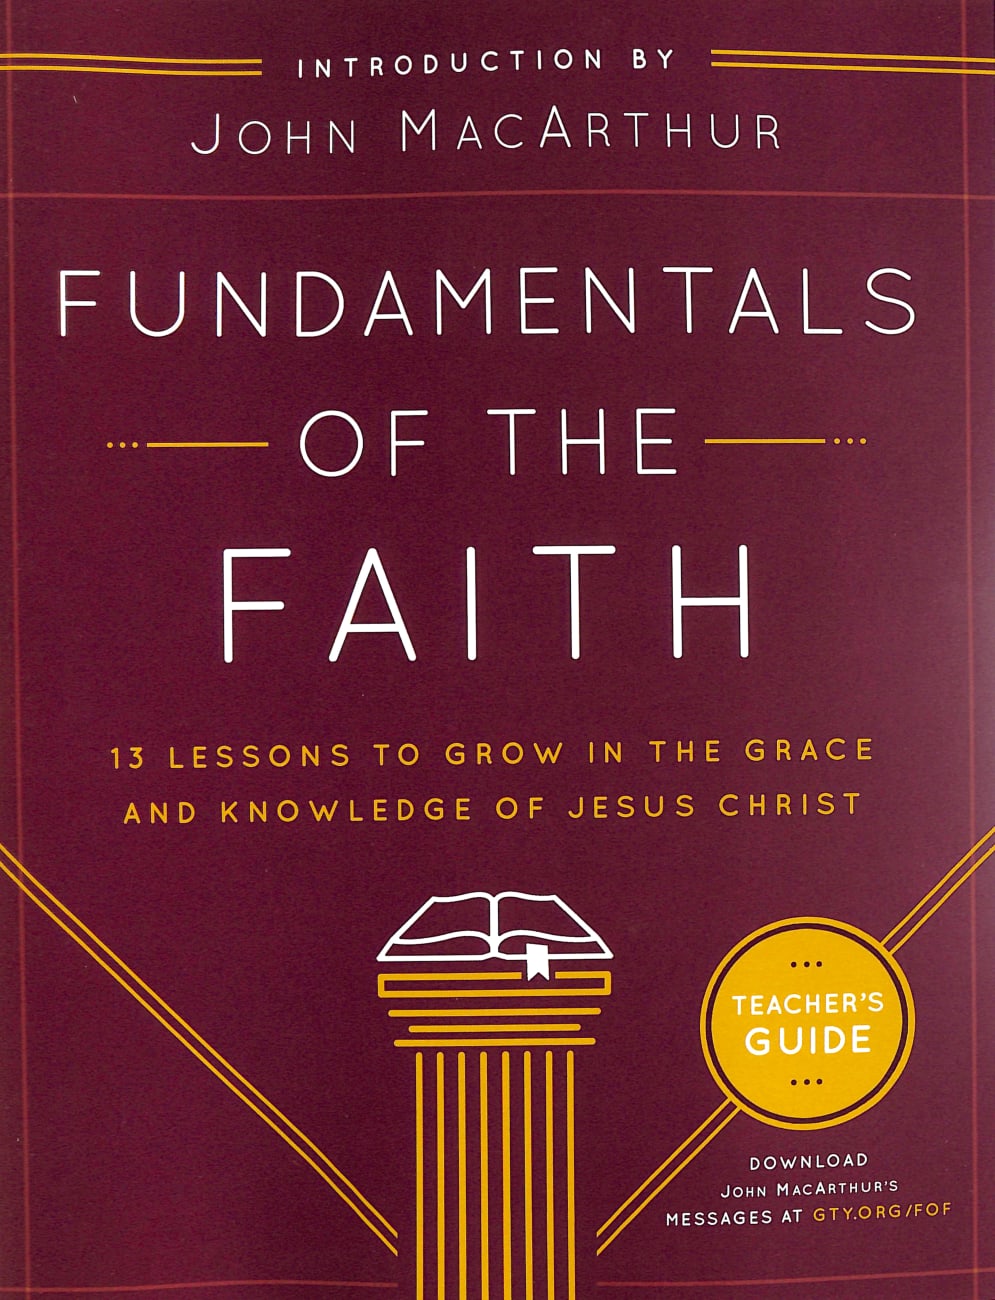 Fundamentals of the Faith: 13 Lessons to Grow in the Grace & Knowledge of Jesus Christ (Teacher's Guide) Paperback